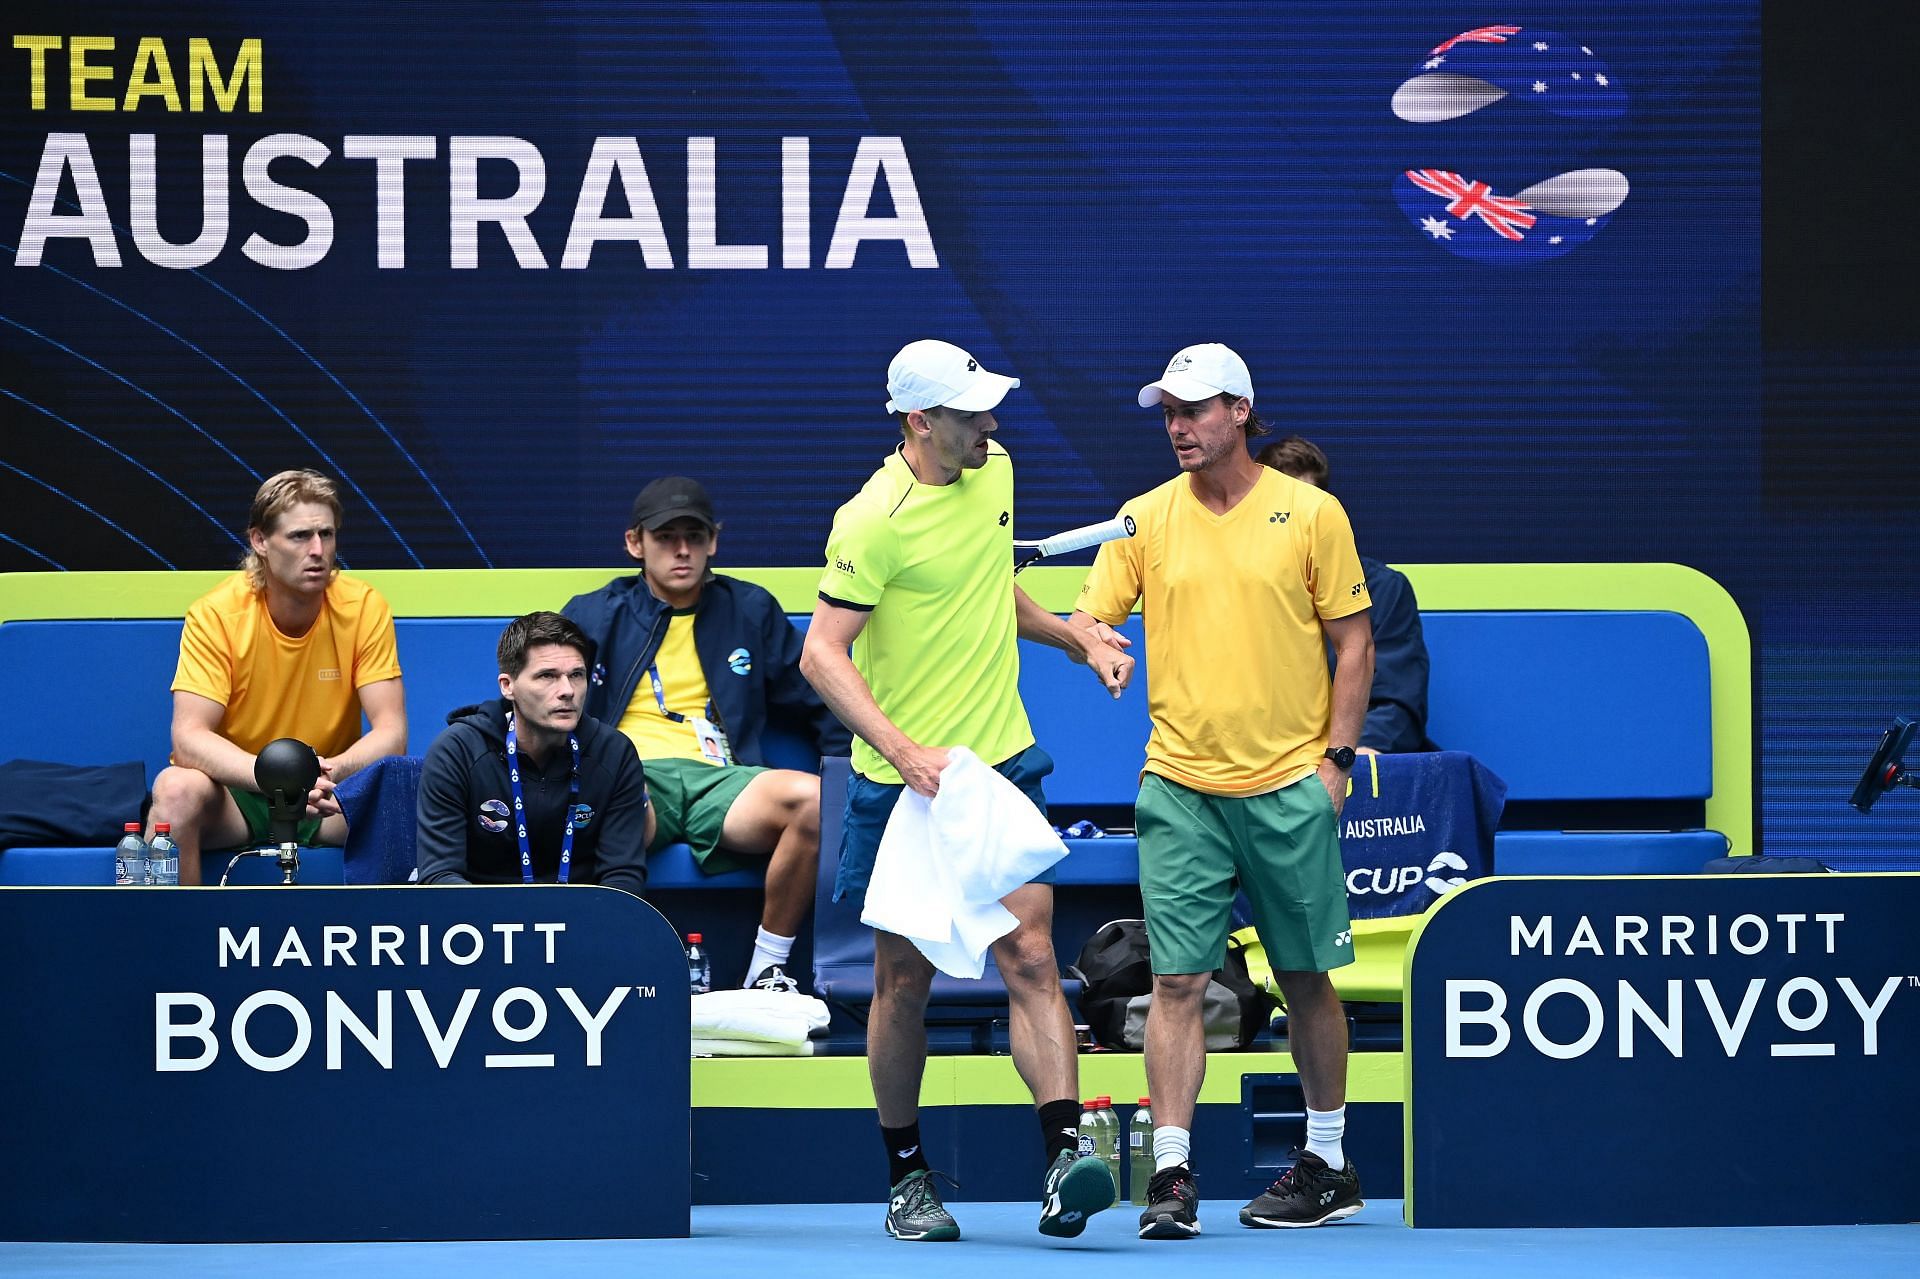 Hosts Australia to play their first ATP Cup match on January 2